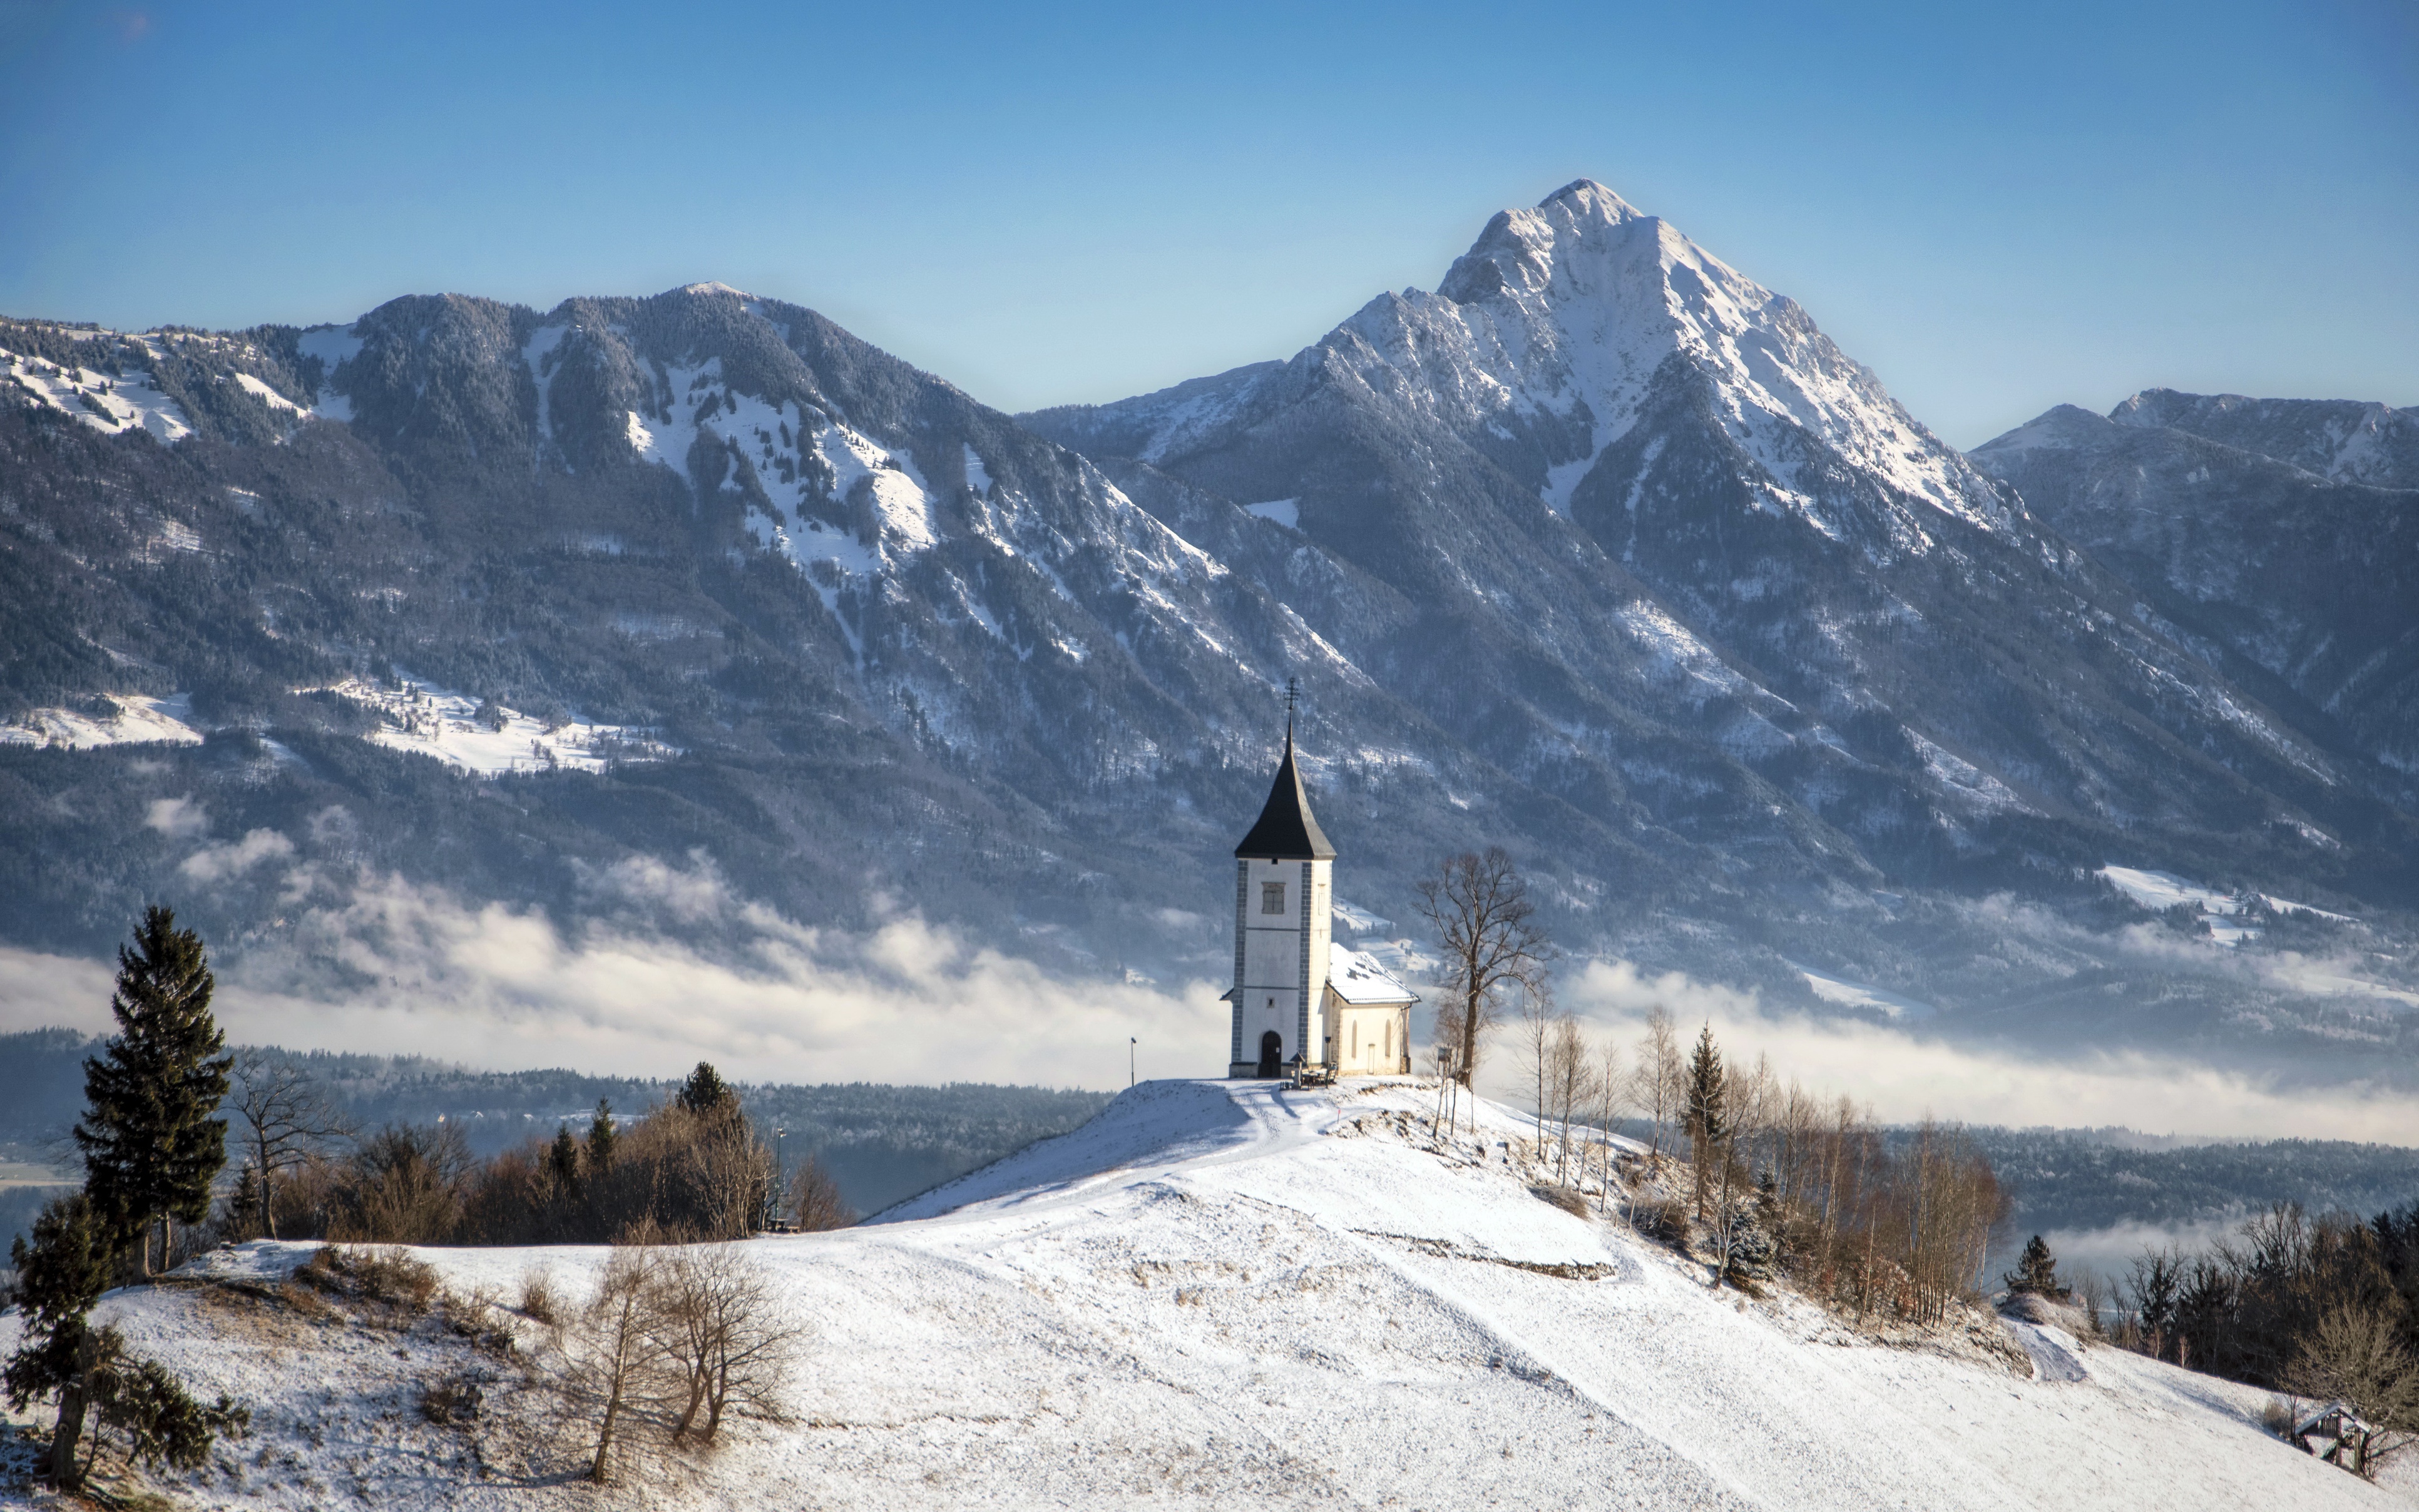 Slovenia Landscape Nature Outdoors Church Building Mountains Winter Snow Cold Snowy Mountain Snowy P 3865x2416